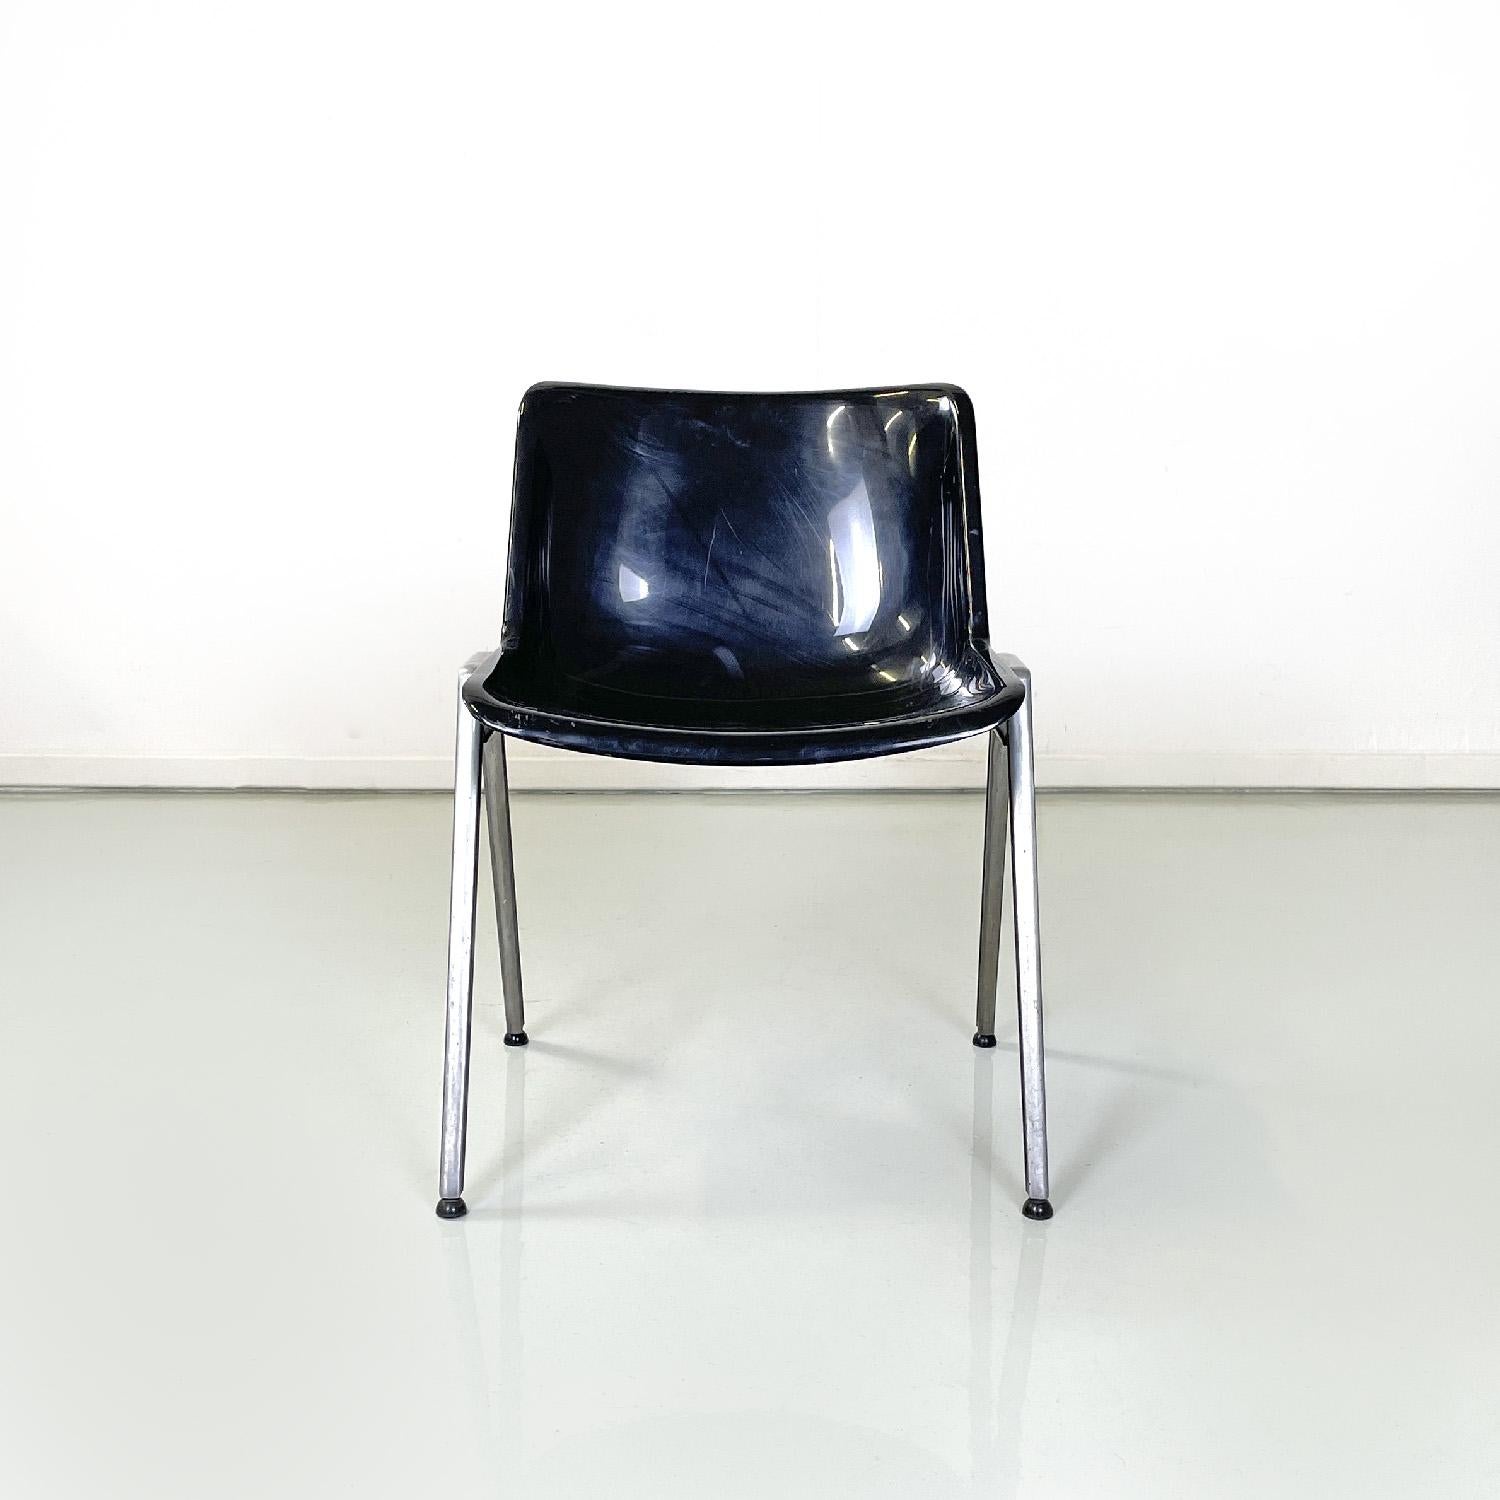 Italian modern black plastic chairs Modus SM 203 by Borsani for Tecno, 1980s In Good Condition For Sale In MIlano, IT